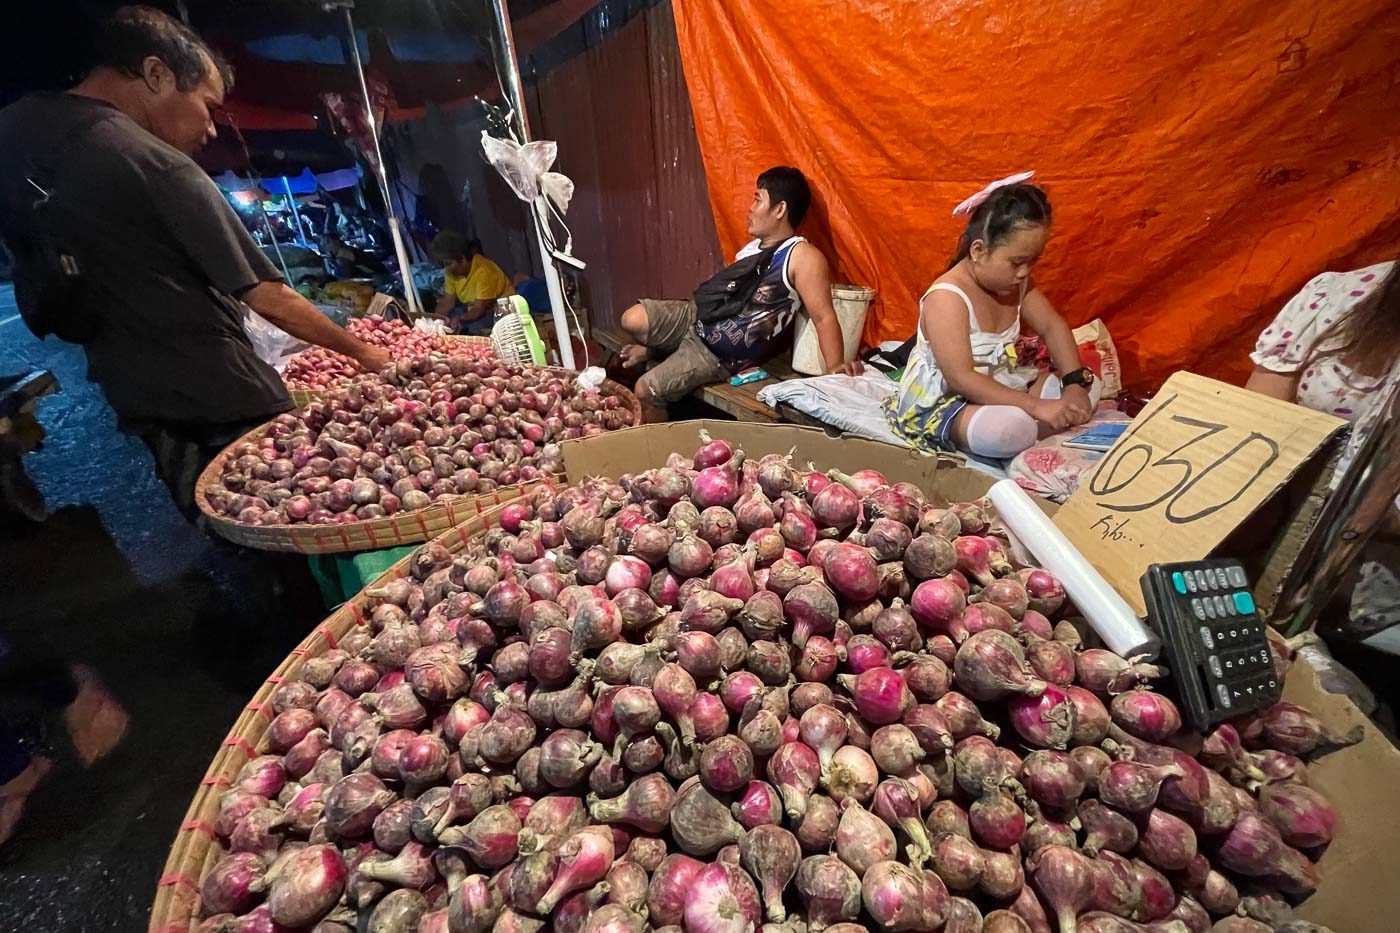 More Filipinos say quality of life got better, despite higher food cost – SWS survey